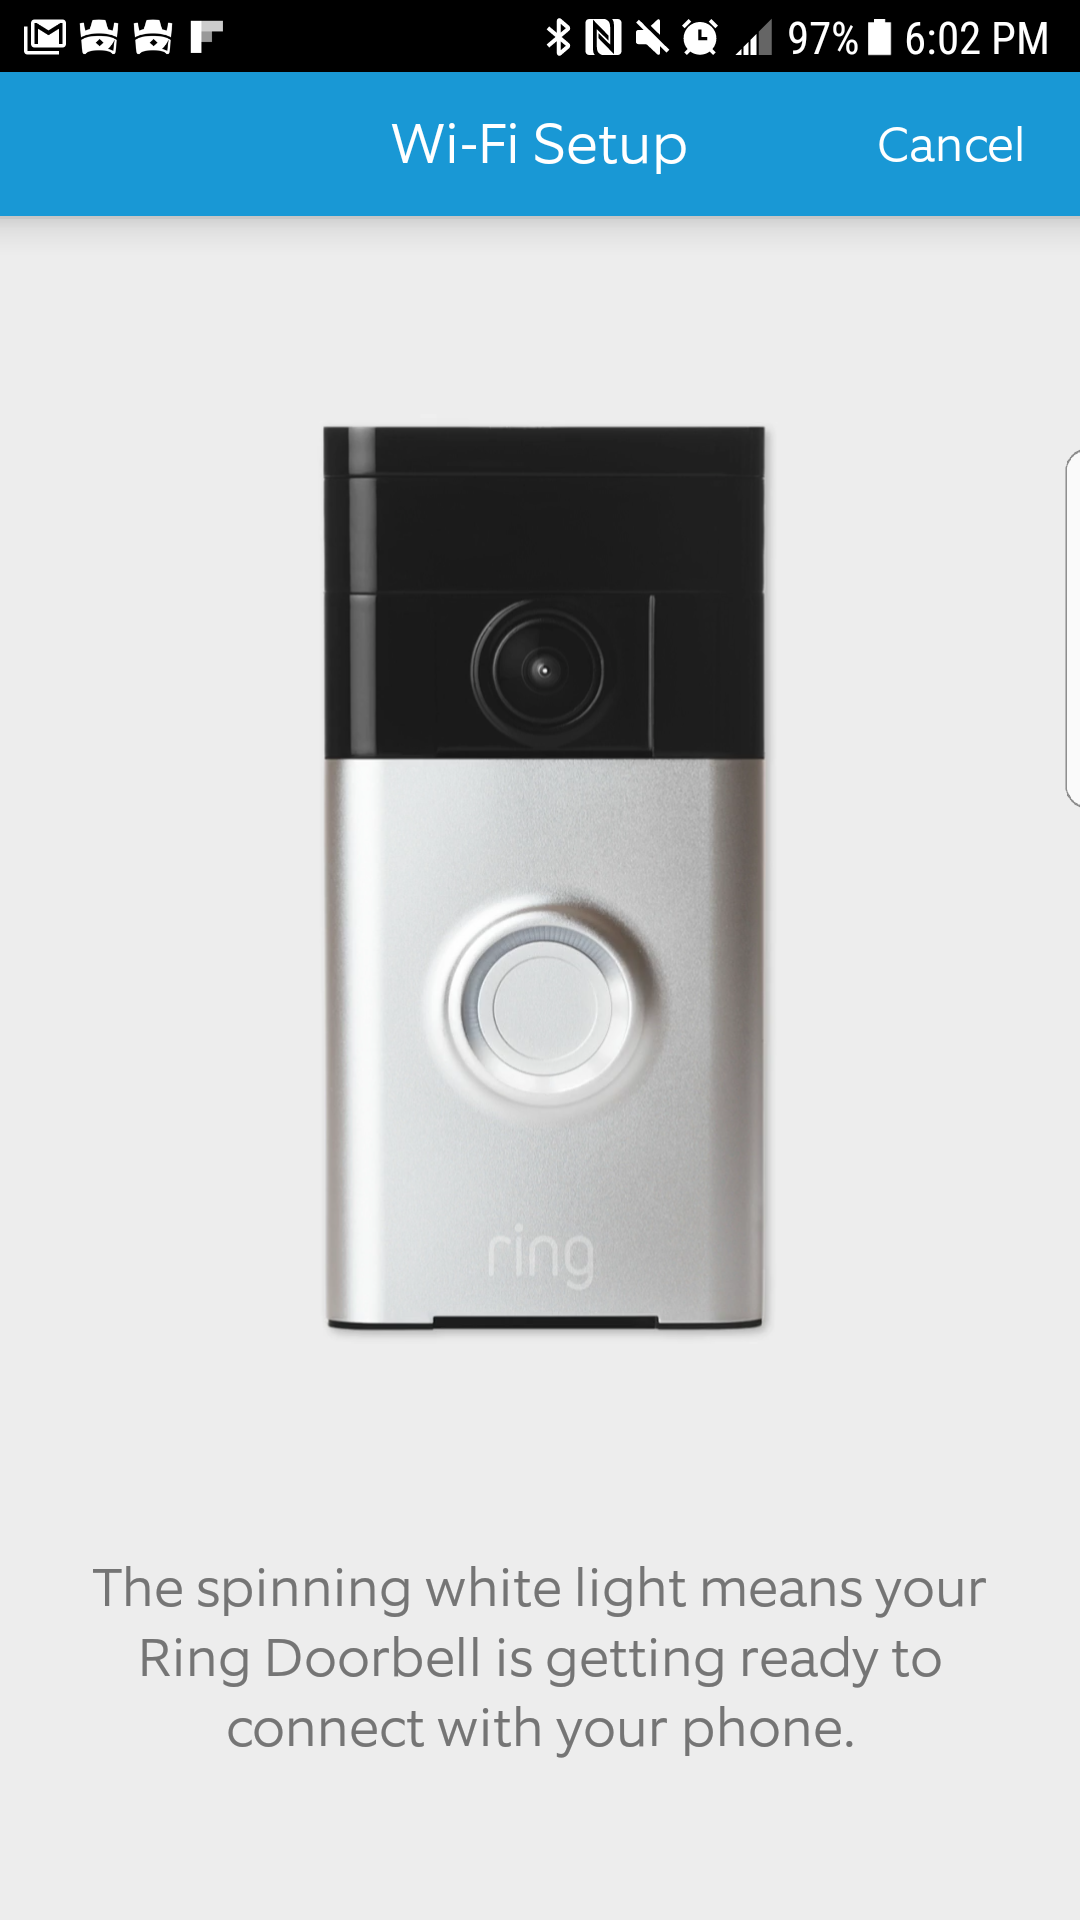 You are notified about the spinning white light that indicates your Ring video doorbell is ready for setup!